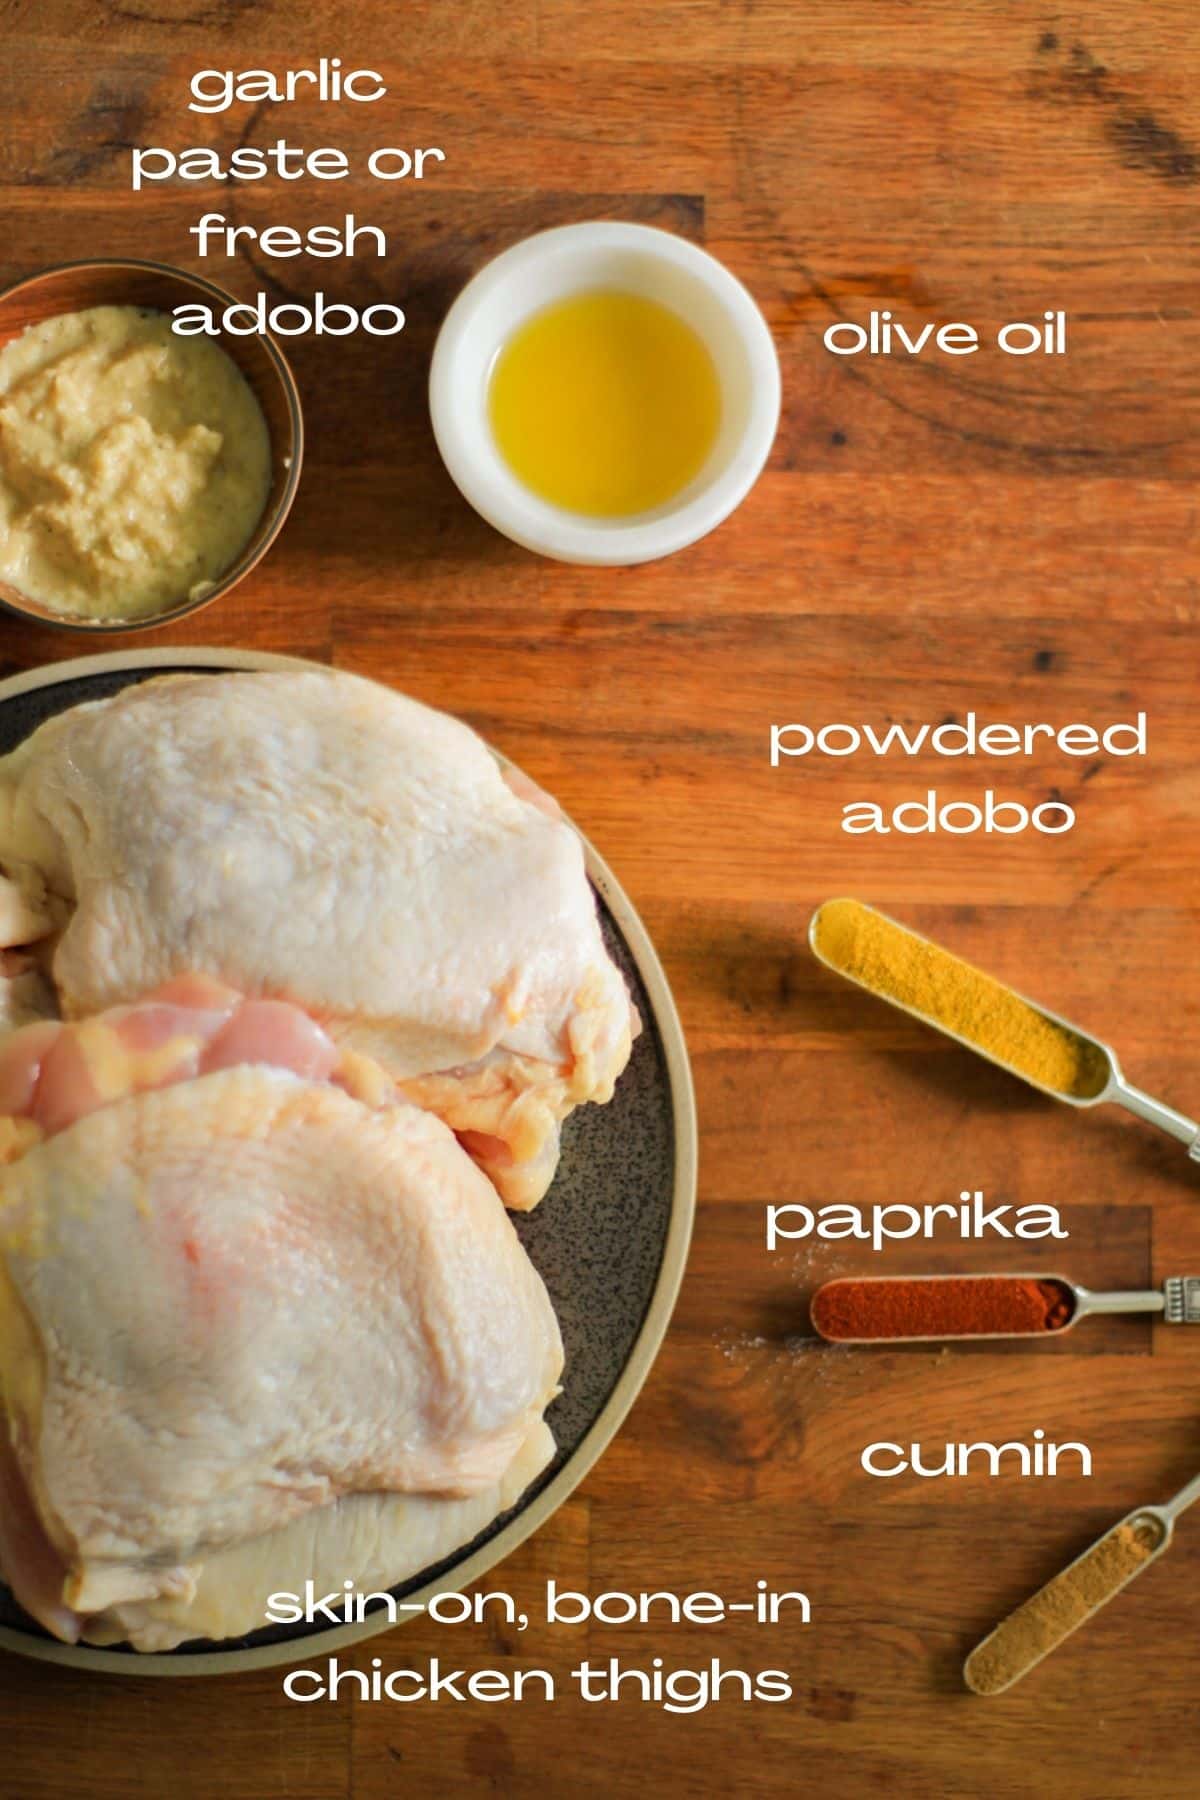 ingredients for roasted chicken thighs: garlic paste or fresh adobo, olive oil, powdered adobo, paprika, cumin, skin on chicken thighs.